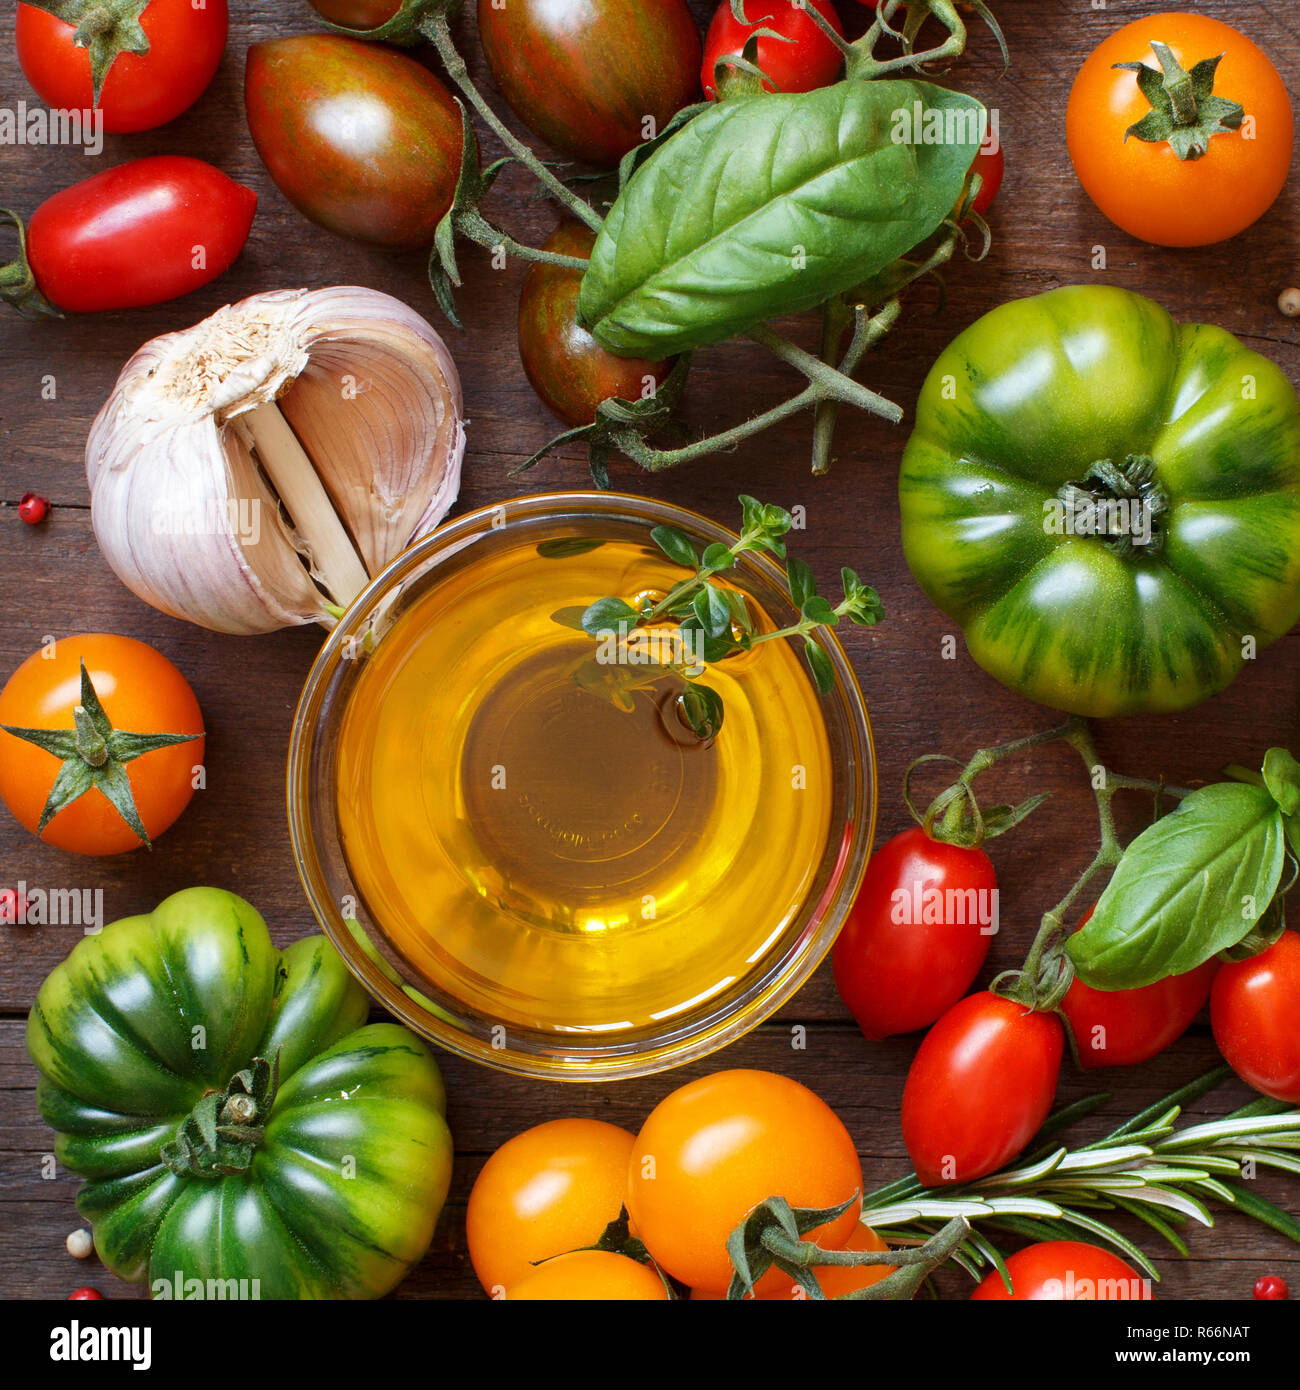 Colorful tomatoes, garlic, olive oil and herbs Stock Photo